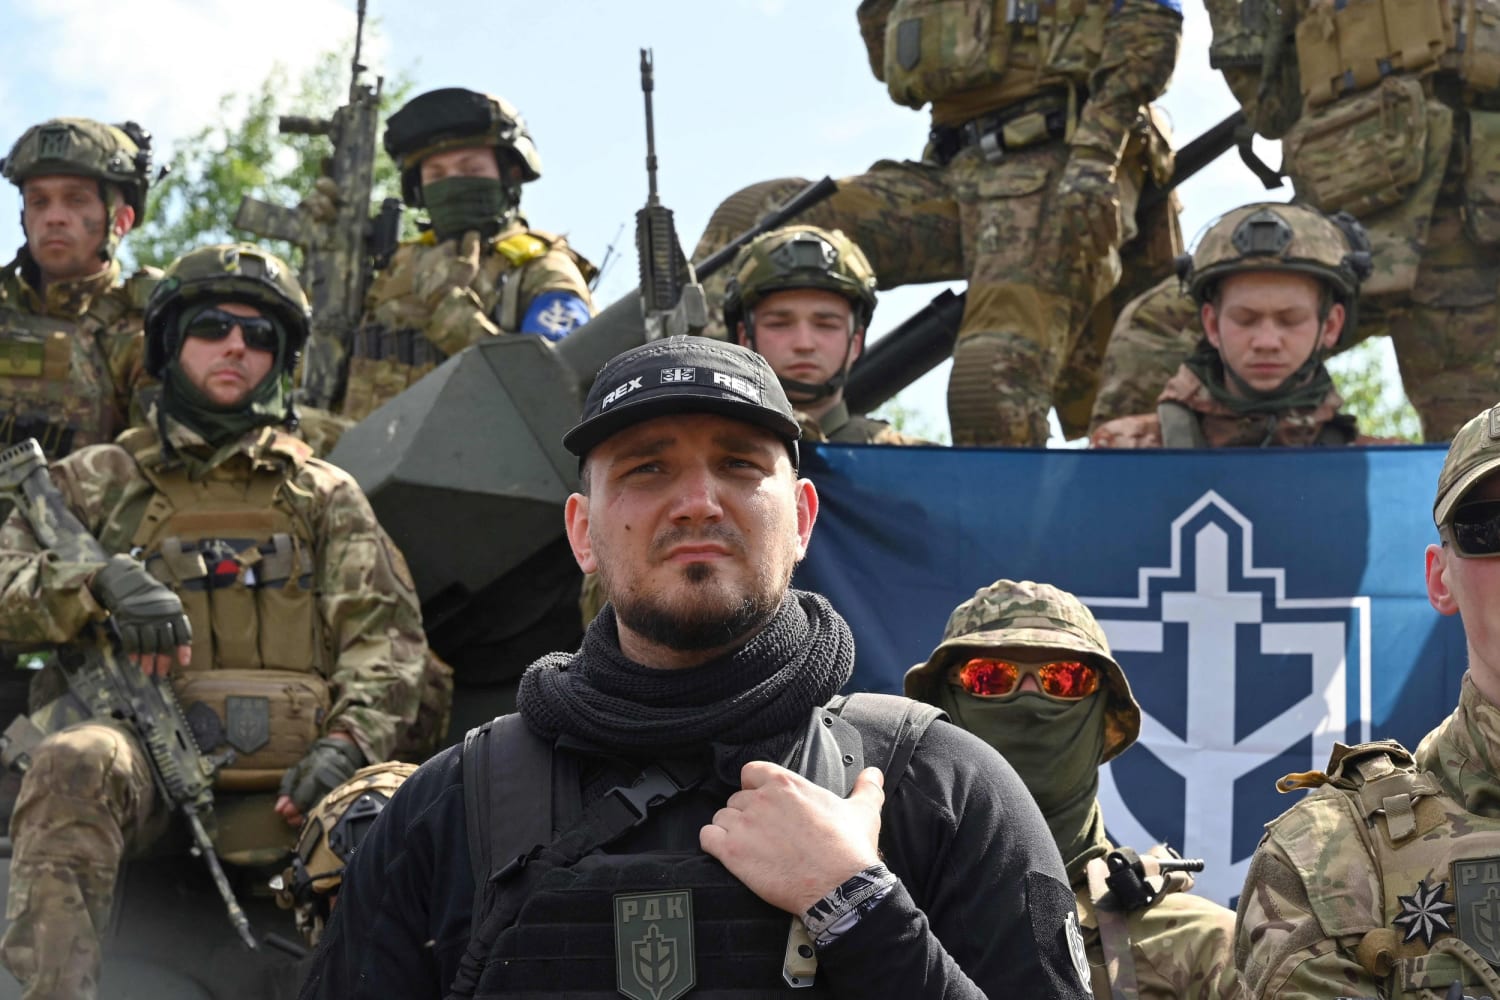 Who are the anti-Putin groups behind the dramatic raid into Russia?